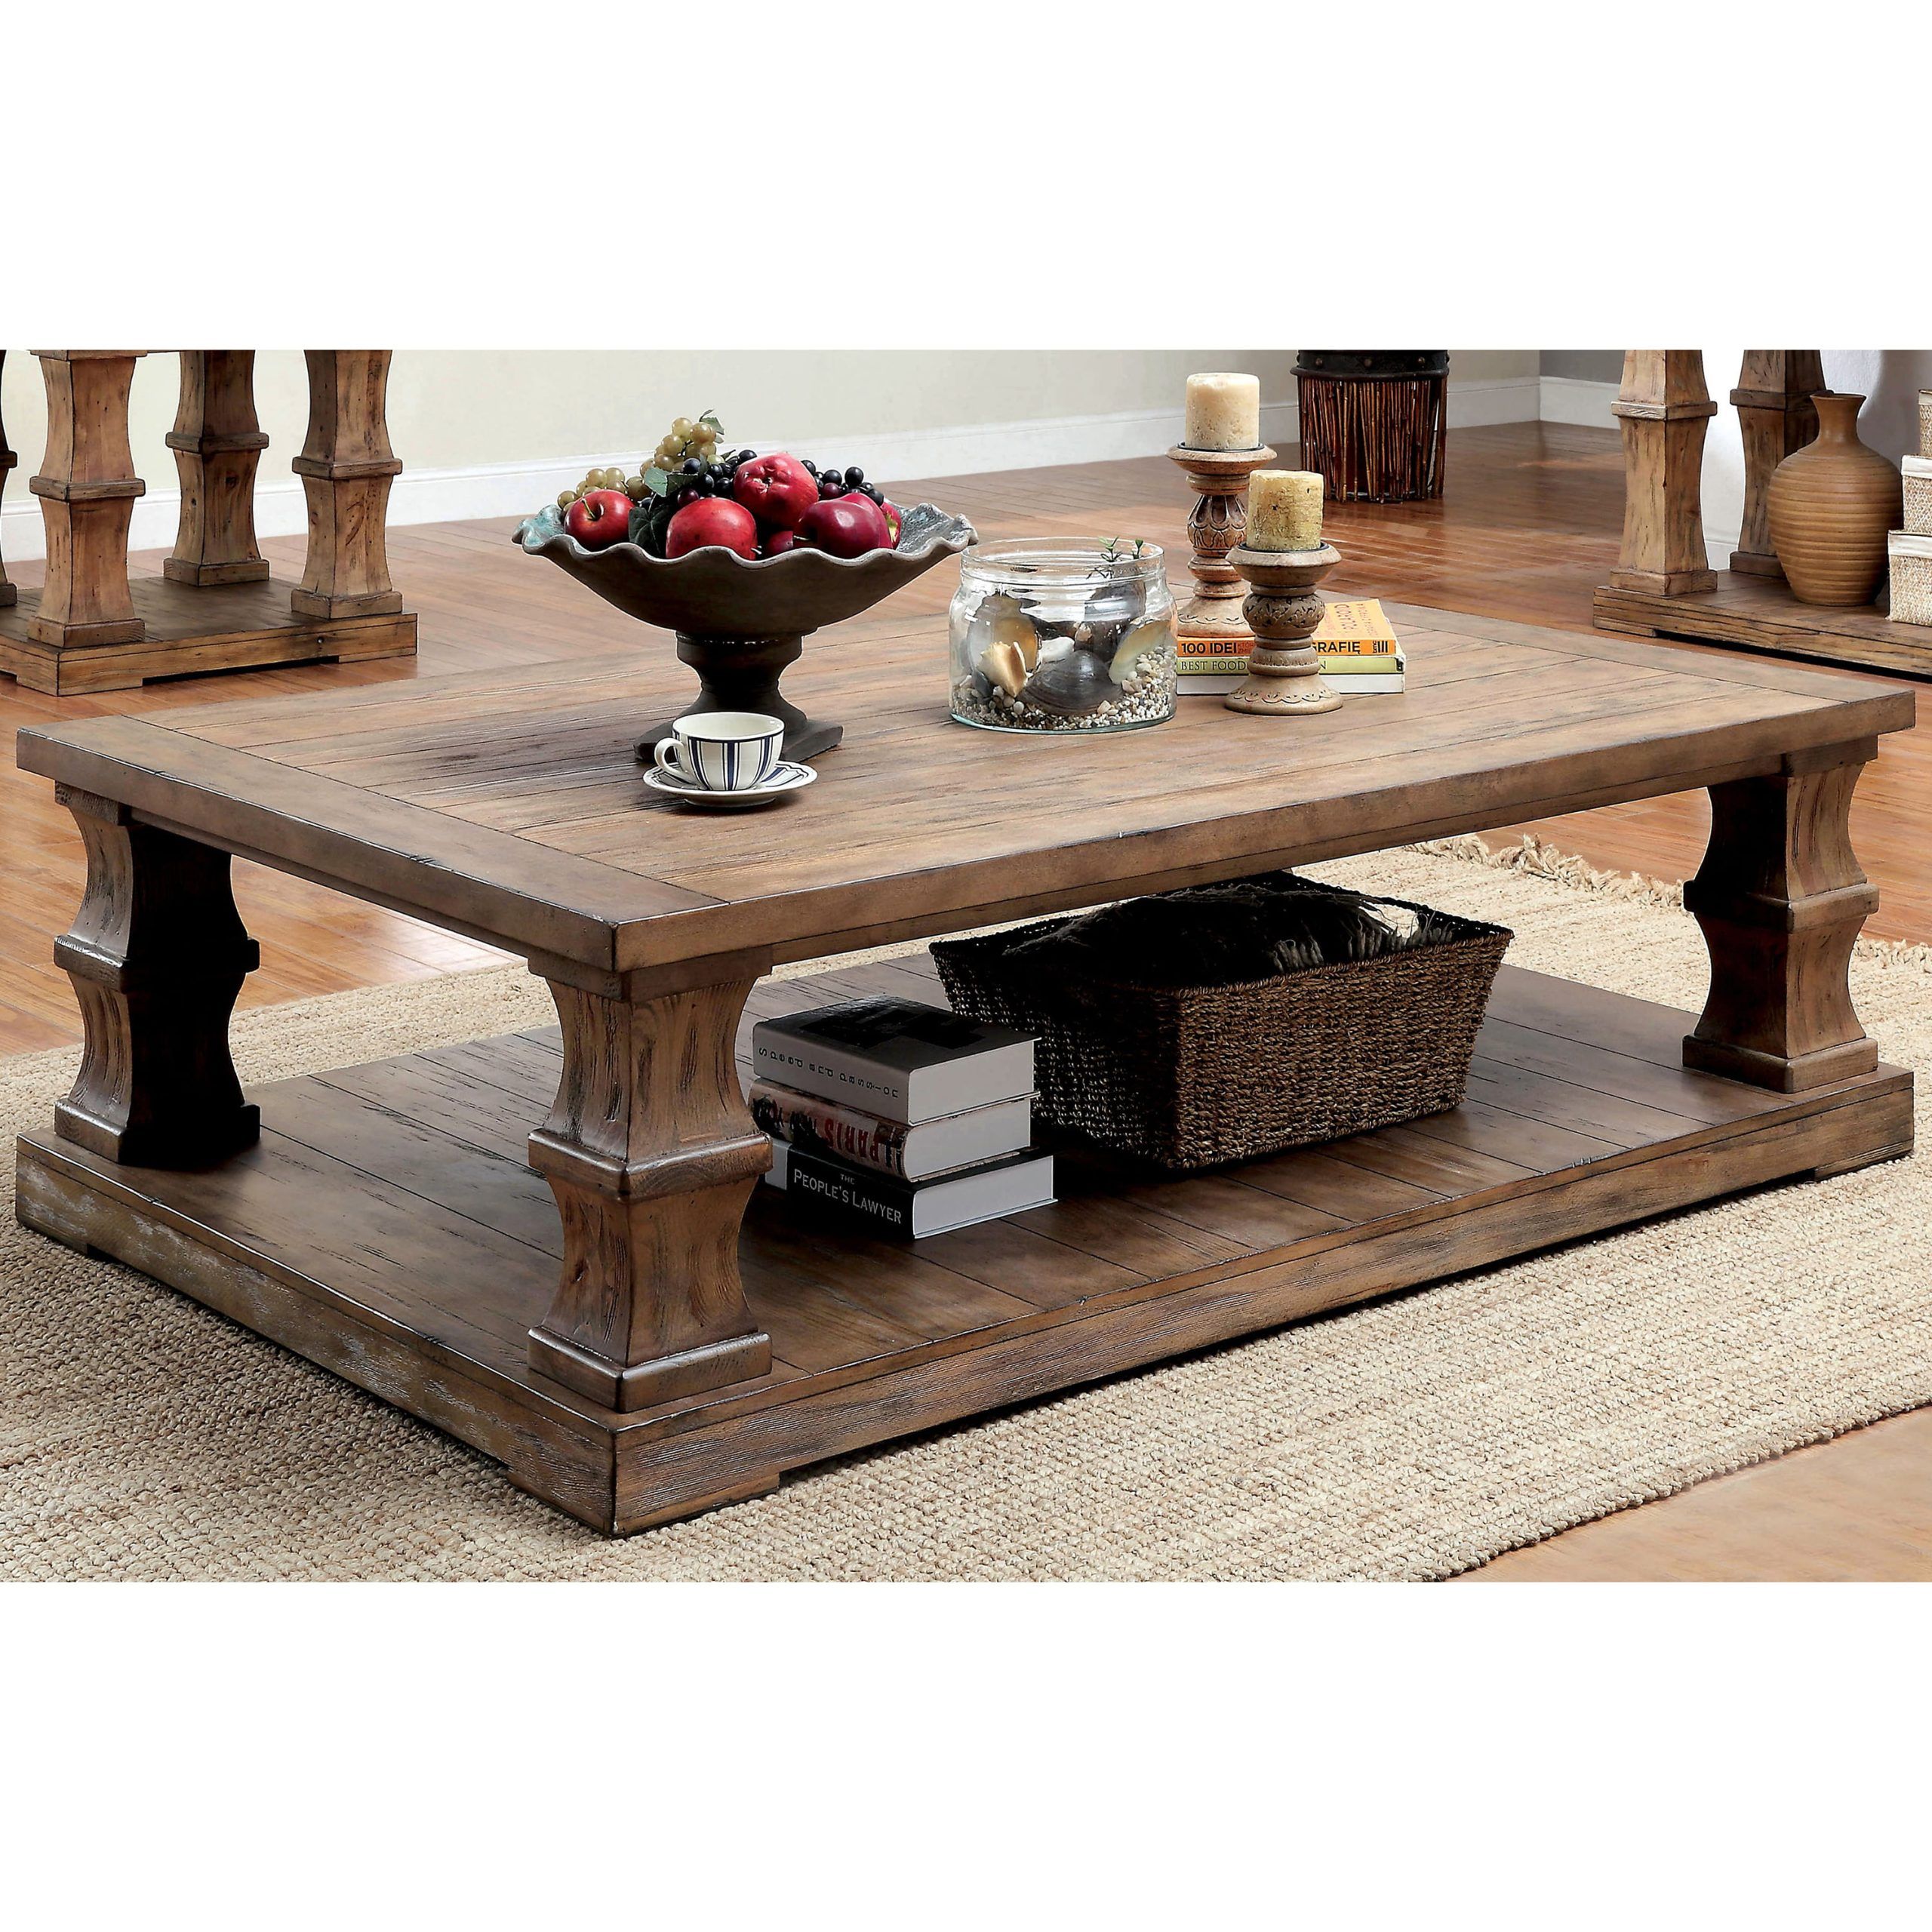 Furniture Of America Bonita Transitional Coffee Table, Natural Tone Within Transitional Square Coffee Tables (Gallery 7 of 20)